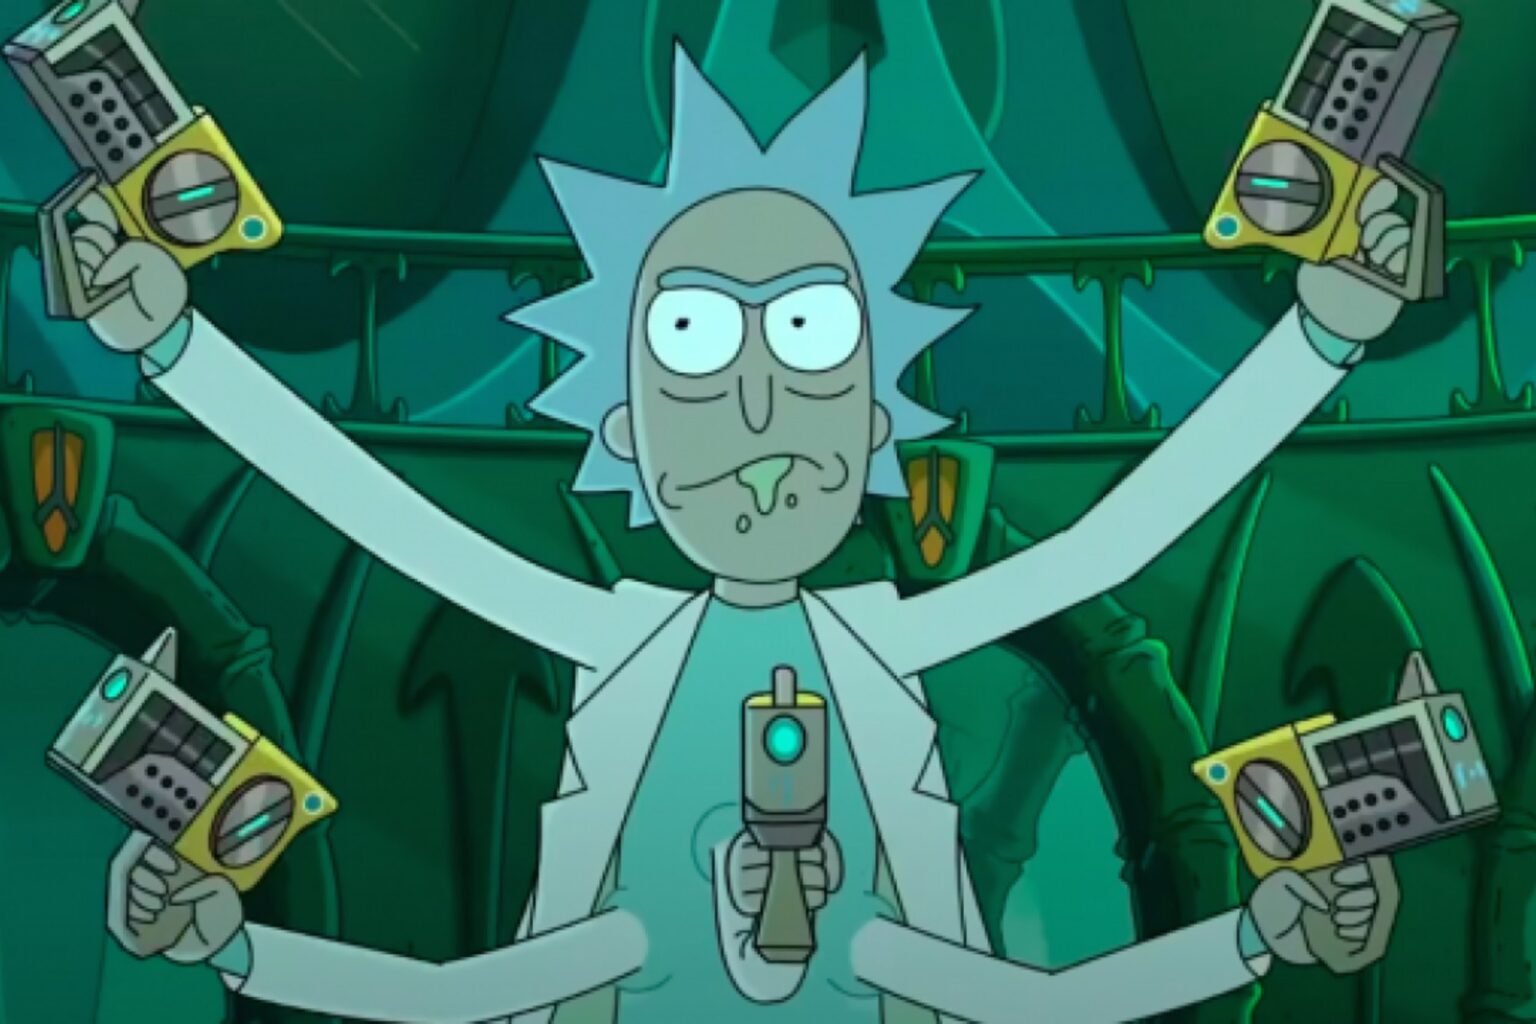 'Rick and Morty' season 4 has been broken into two parts. Find out when the second part is set for release in the UK.